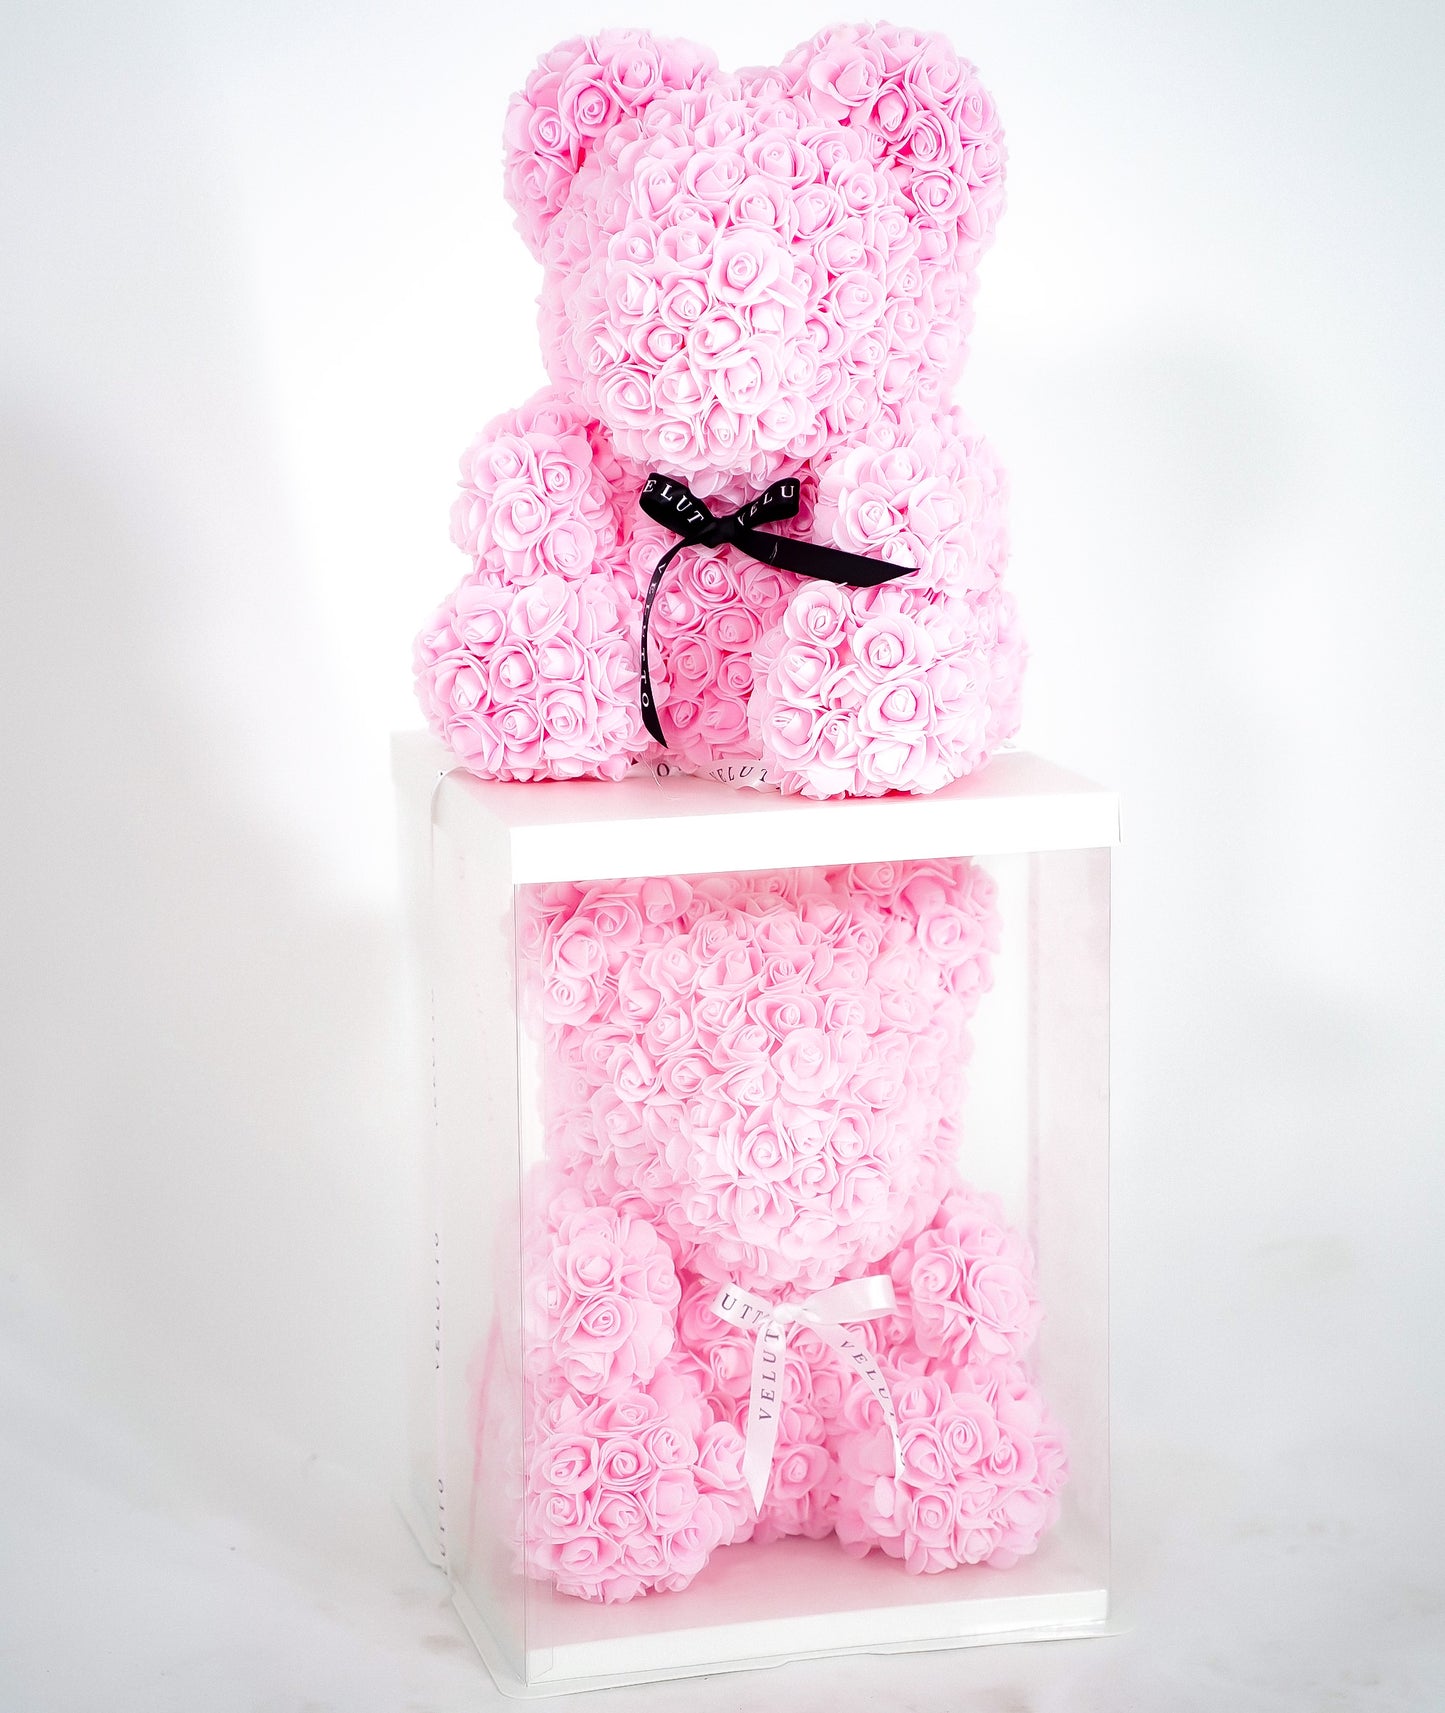 [Velutto Rose Bear] Pink + infused w/ Jo Malone's oil diffuser